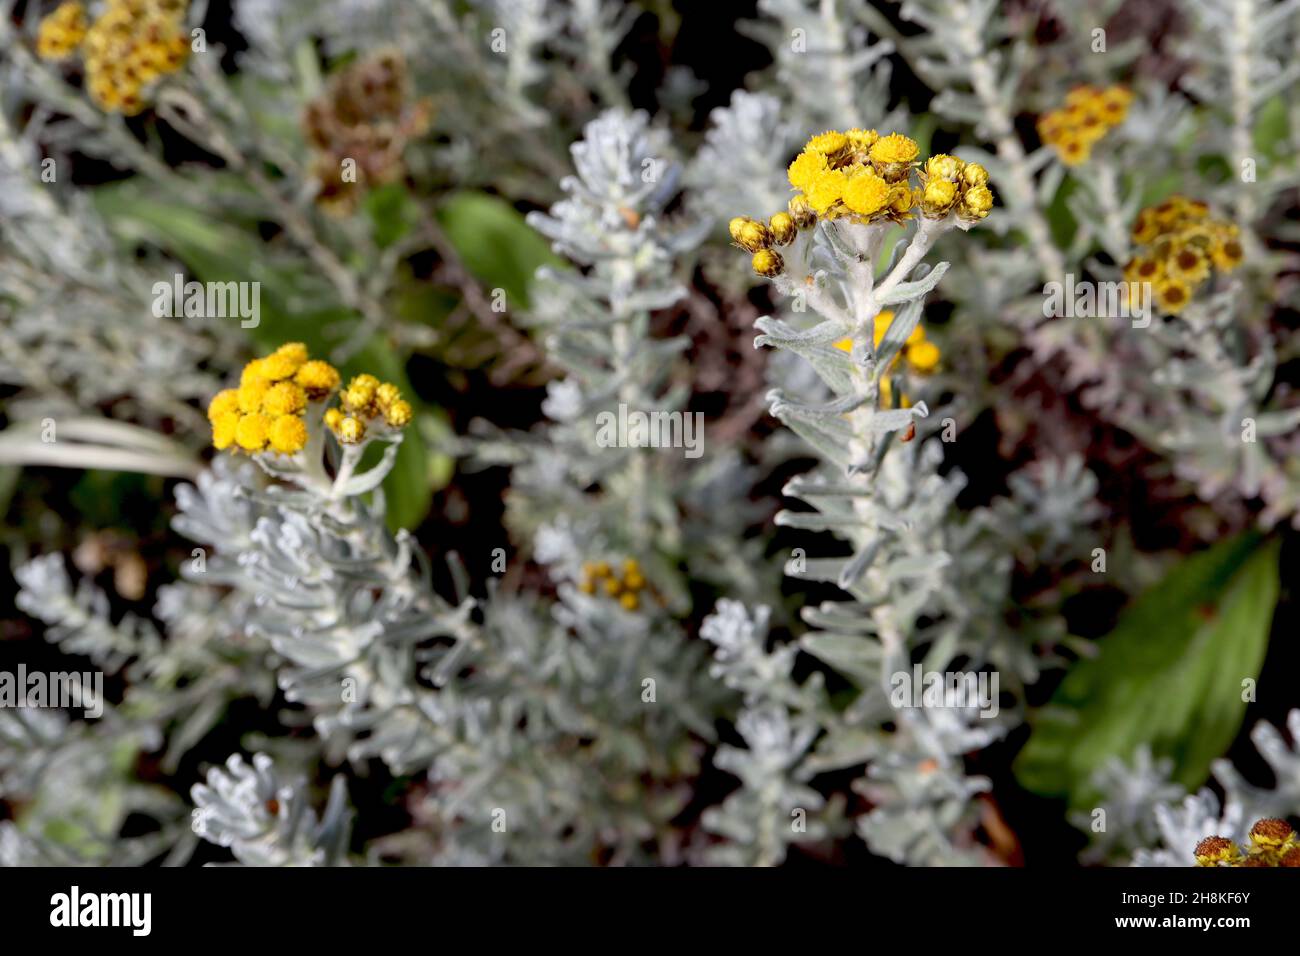 Helichrysum felinum everlasting cat ? - corymbose clusters of small double yellow flowers, small silver grey leaves,  November, England, UK Stock Photo